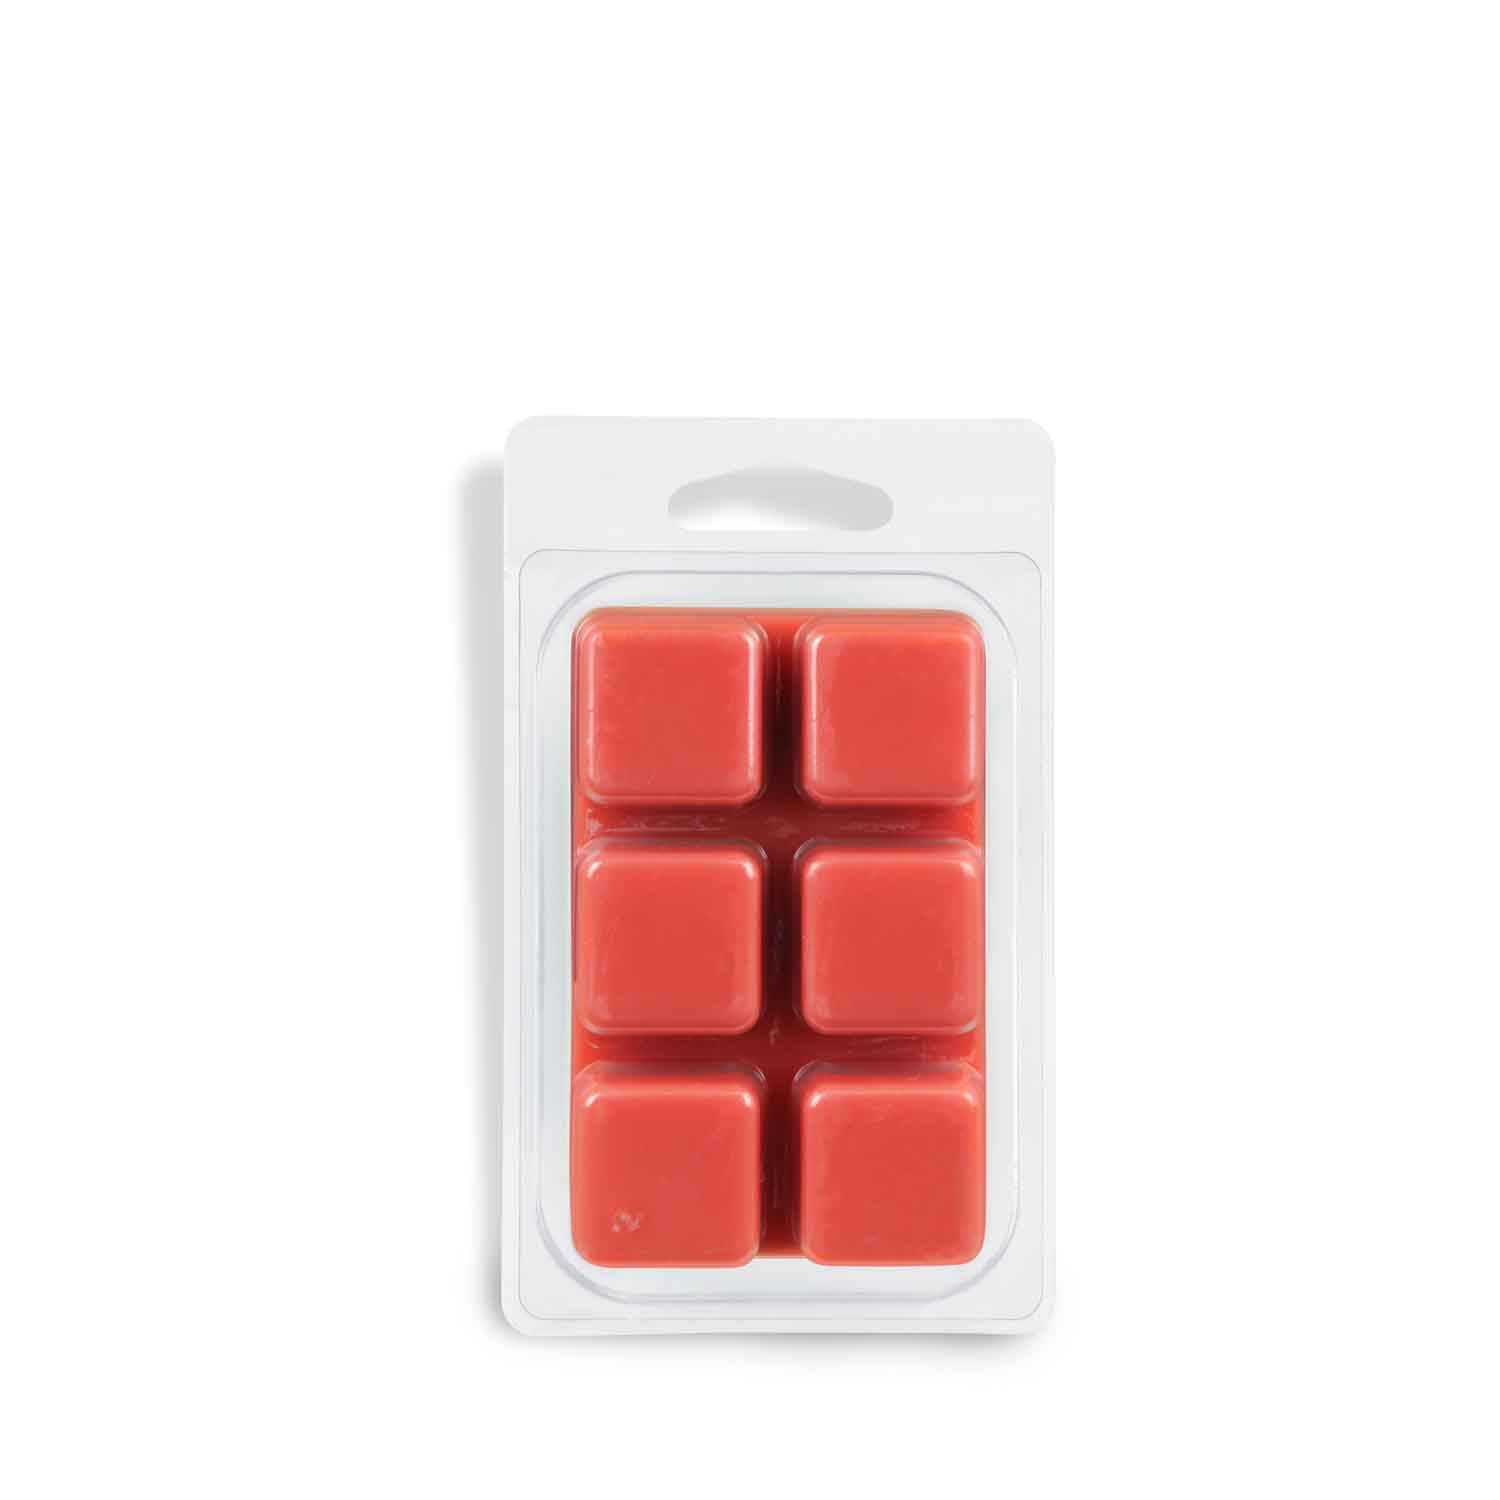 A pack of Mandarin Currant Scented Tuscany Candle wax cubes on a white background, emitting fragrance.